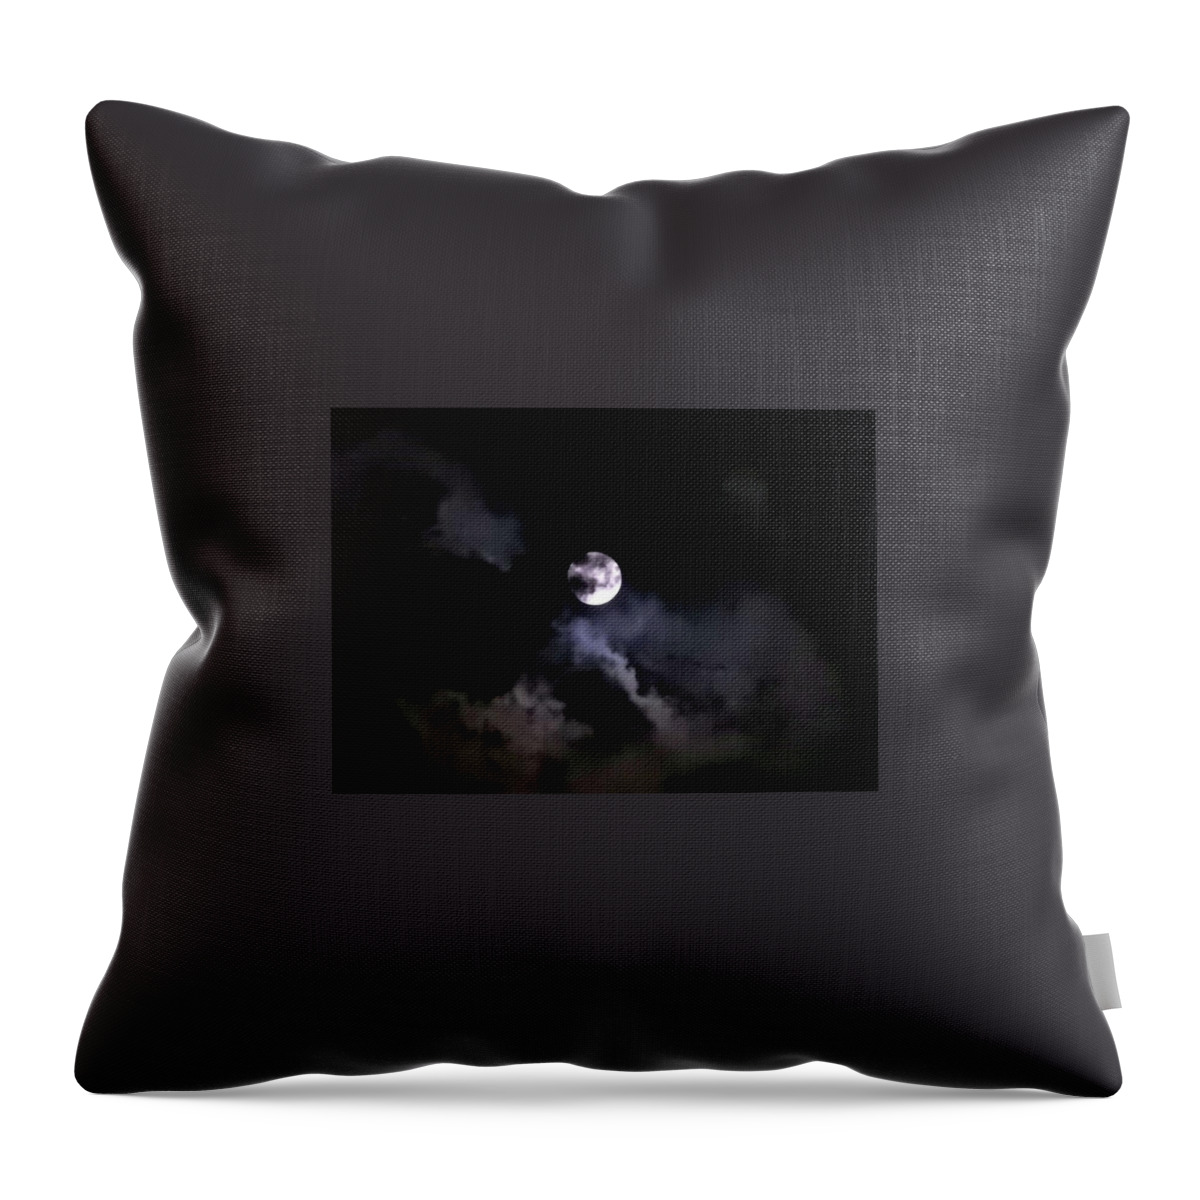 Moon Throw Pillow featuring the photograph Mysterious Moon by Kathy Chism